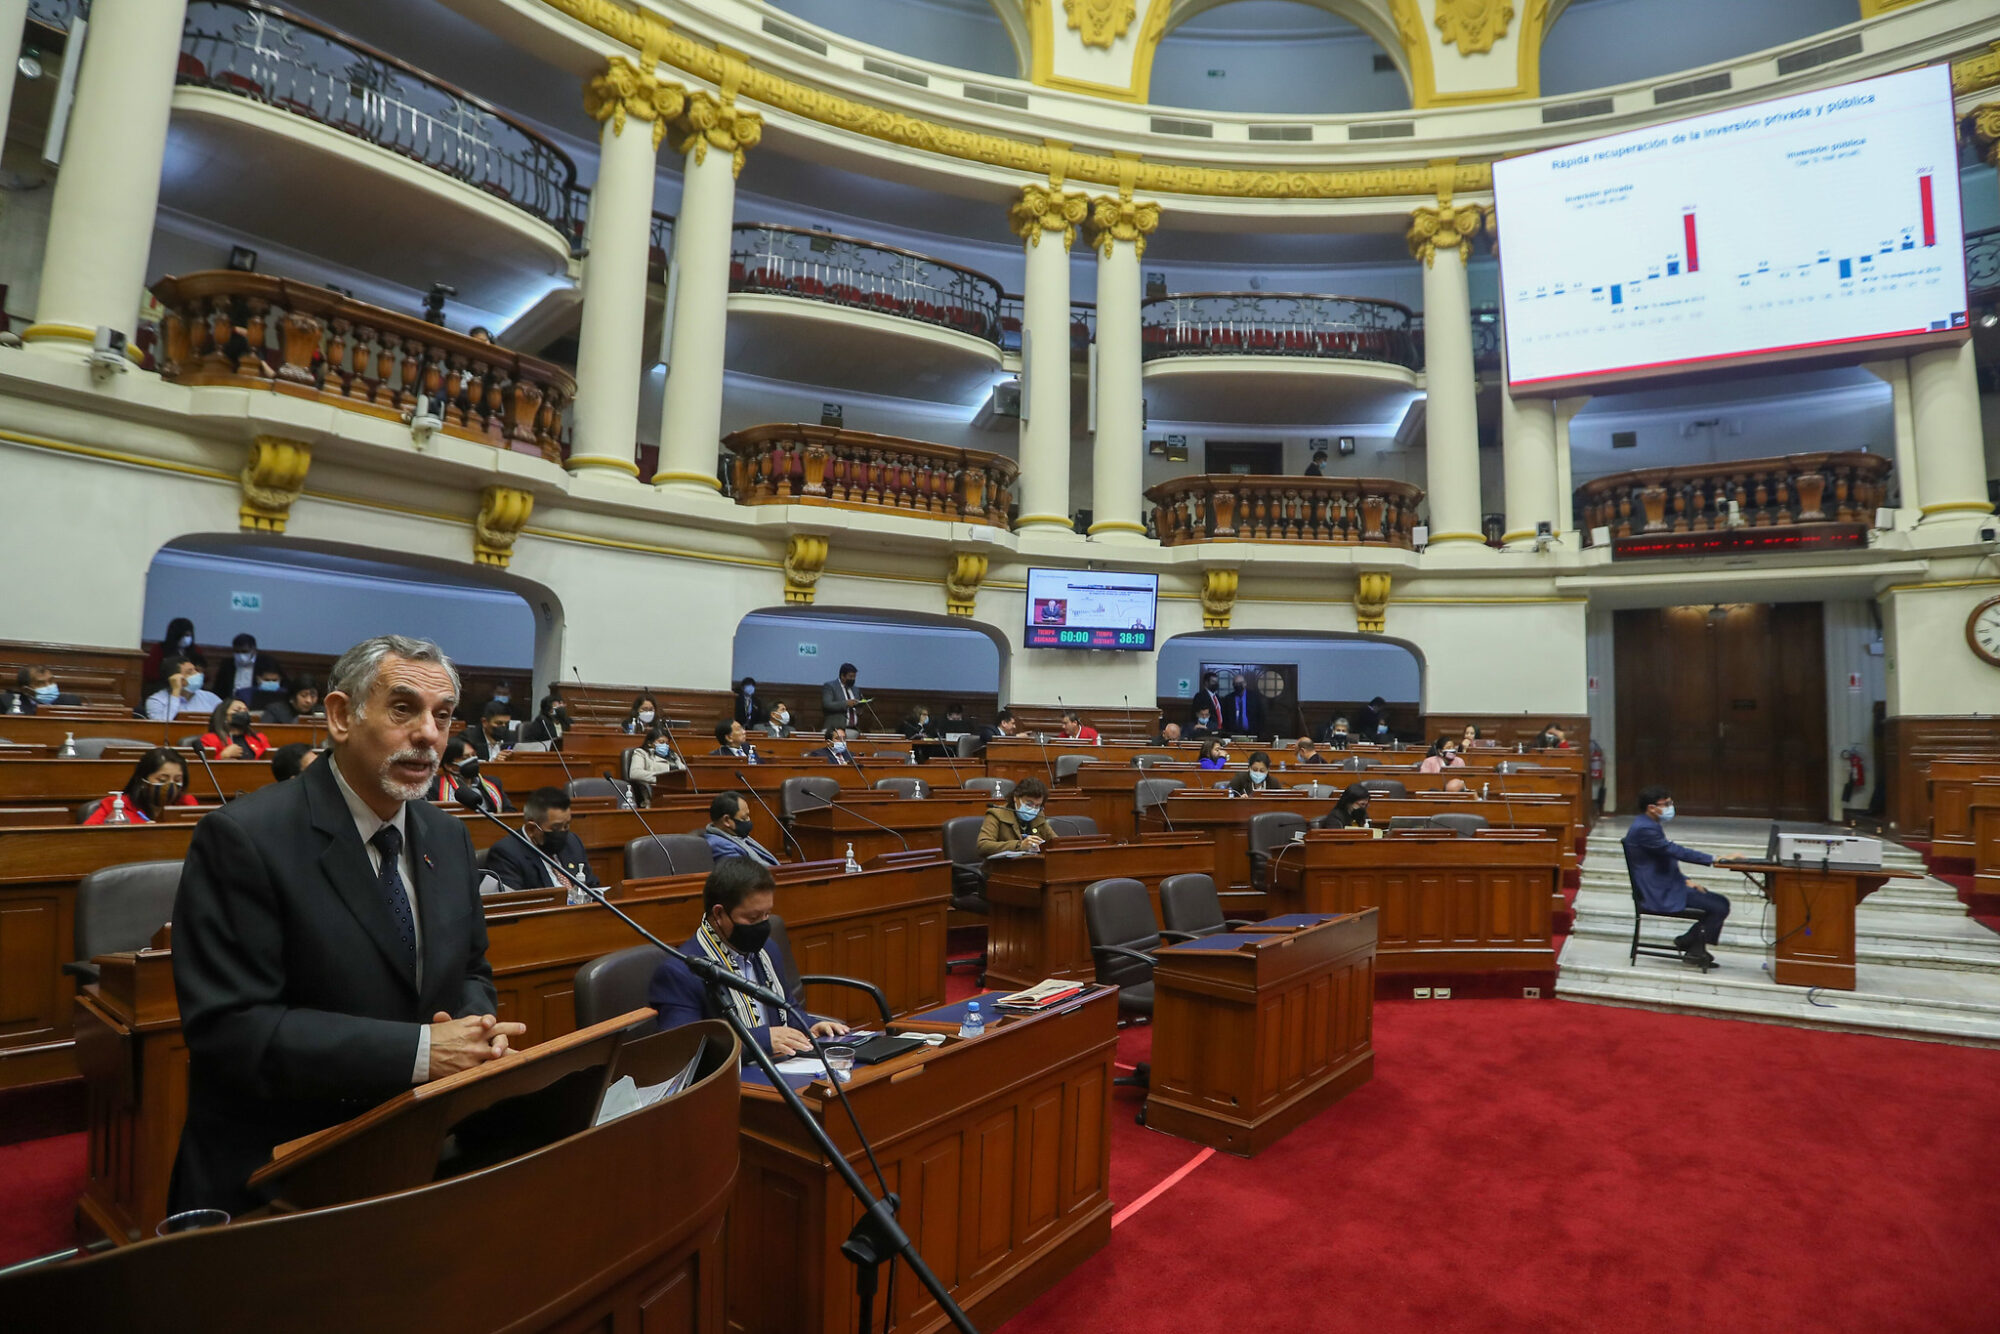 A man in a suit and tie speaks in front of a microphone in the Peruvian Congress.